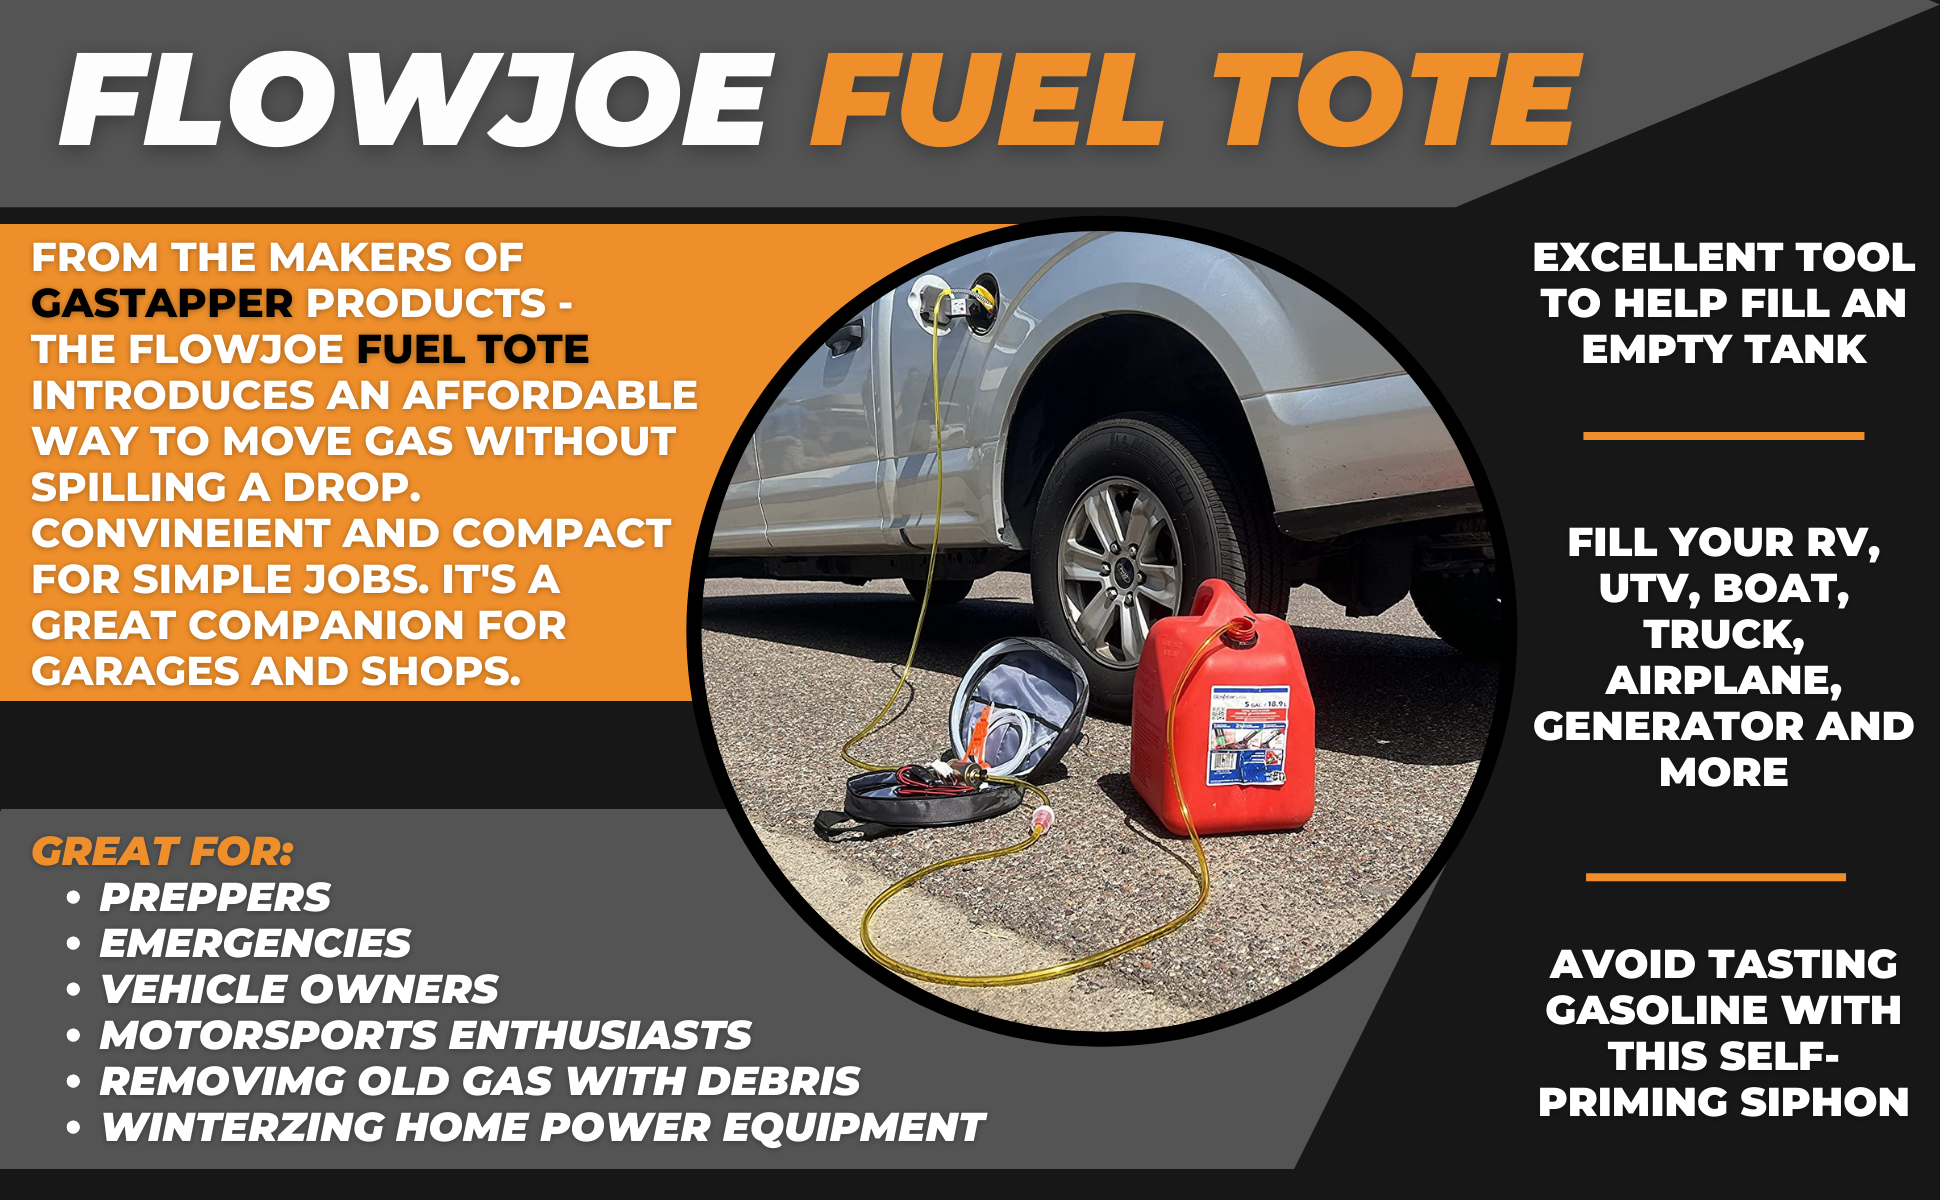 FlowJoe Fuel Tote is an affordable way to move gasoline, great for preppers, emergencies, motorsports enthusiasts and more